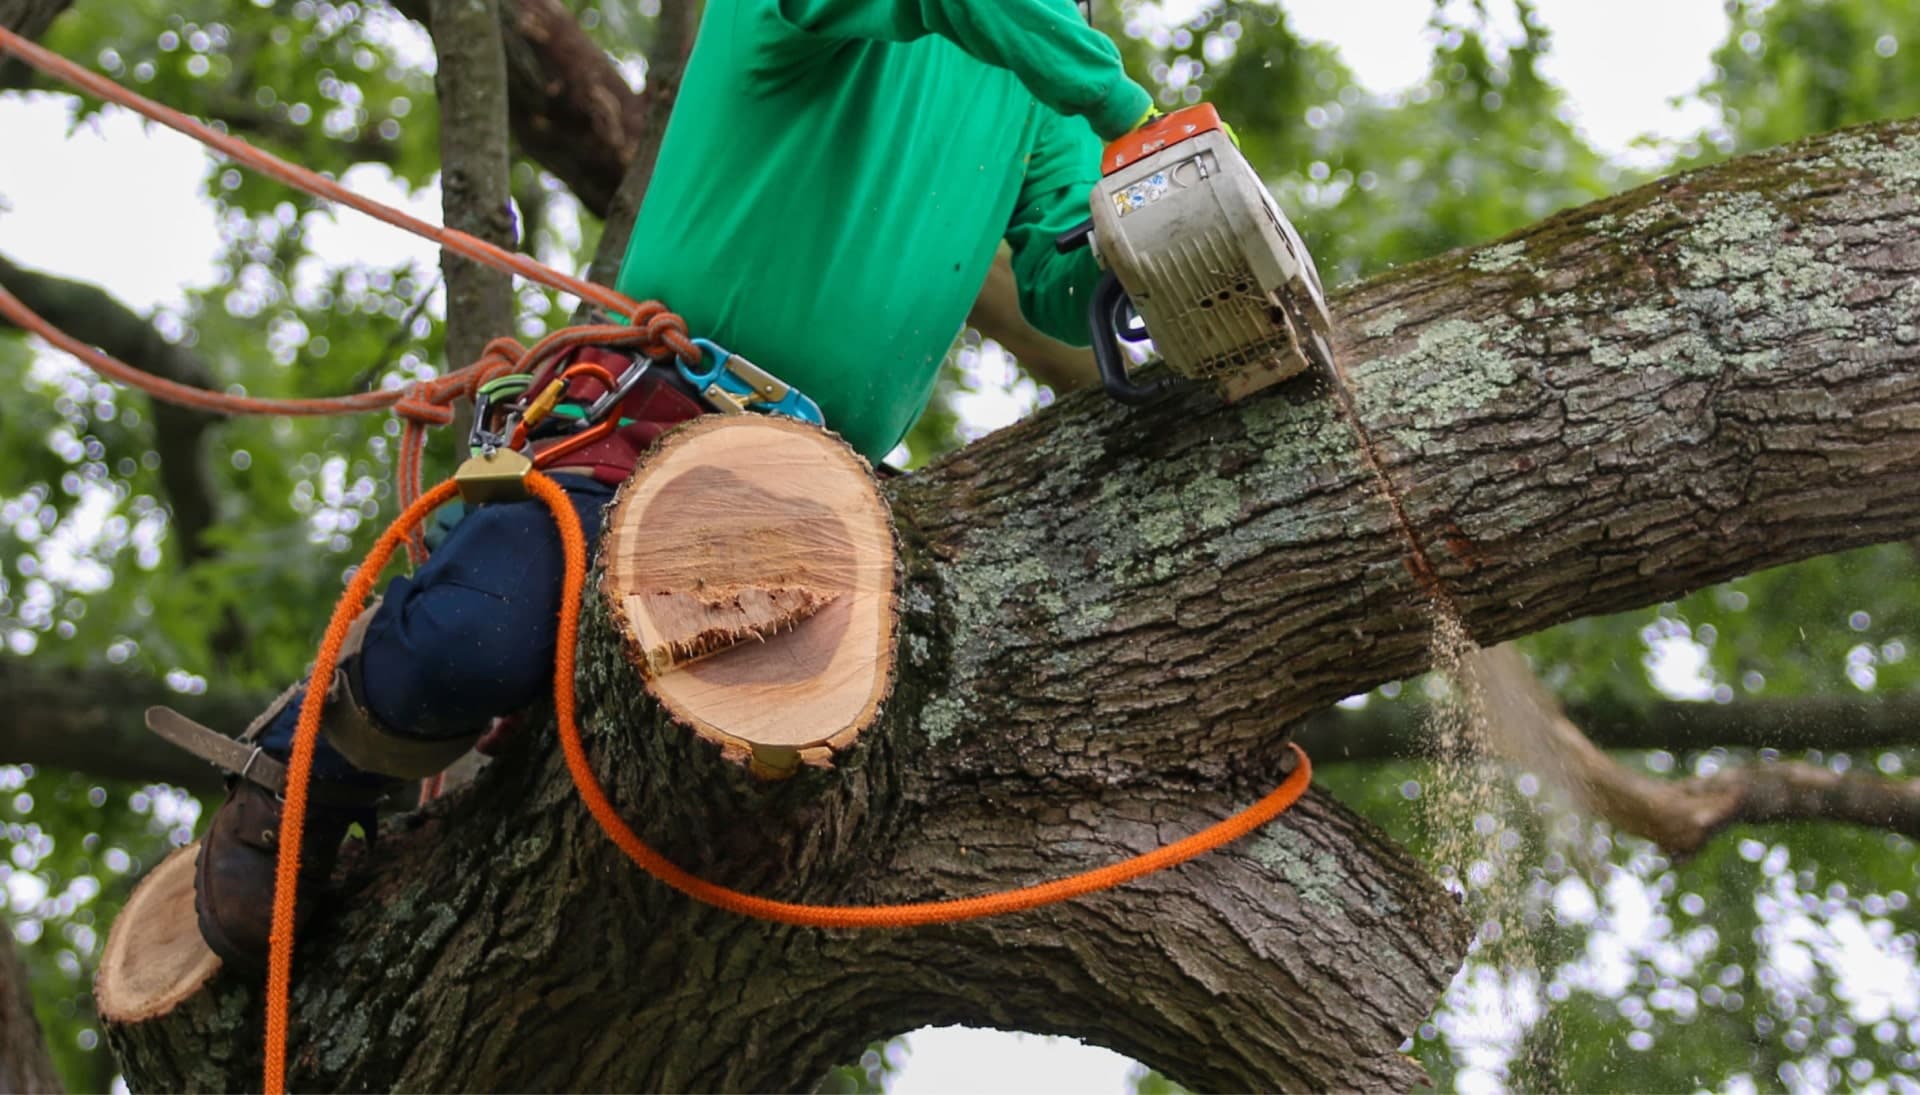 Shed your worries away with best tree removal in Santa Clarita